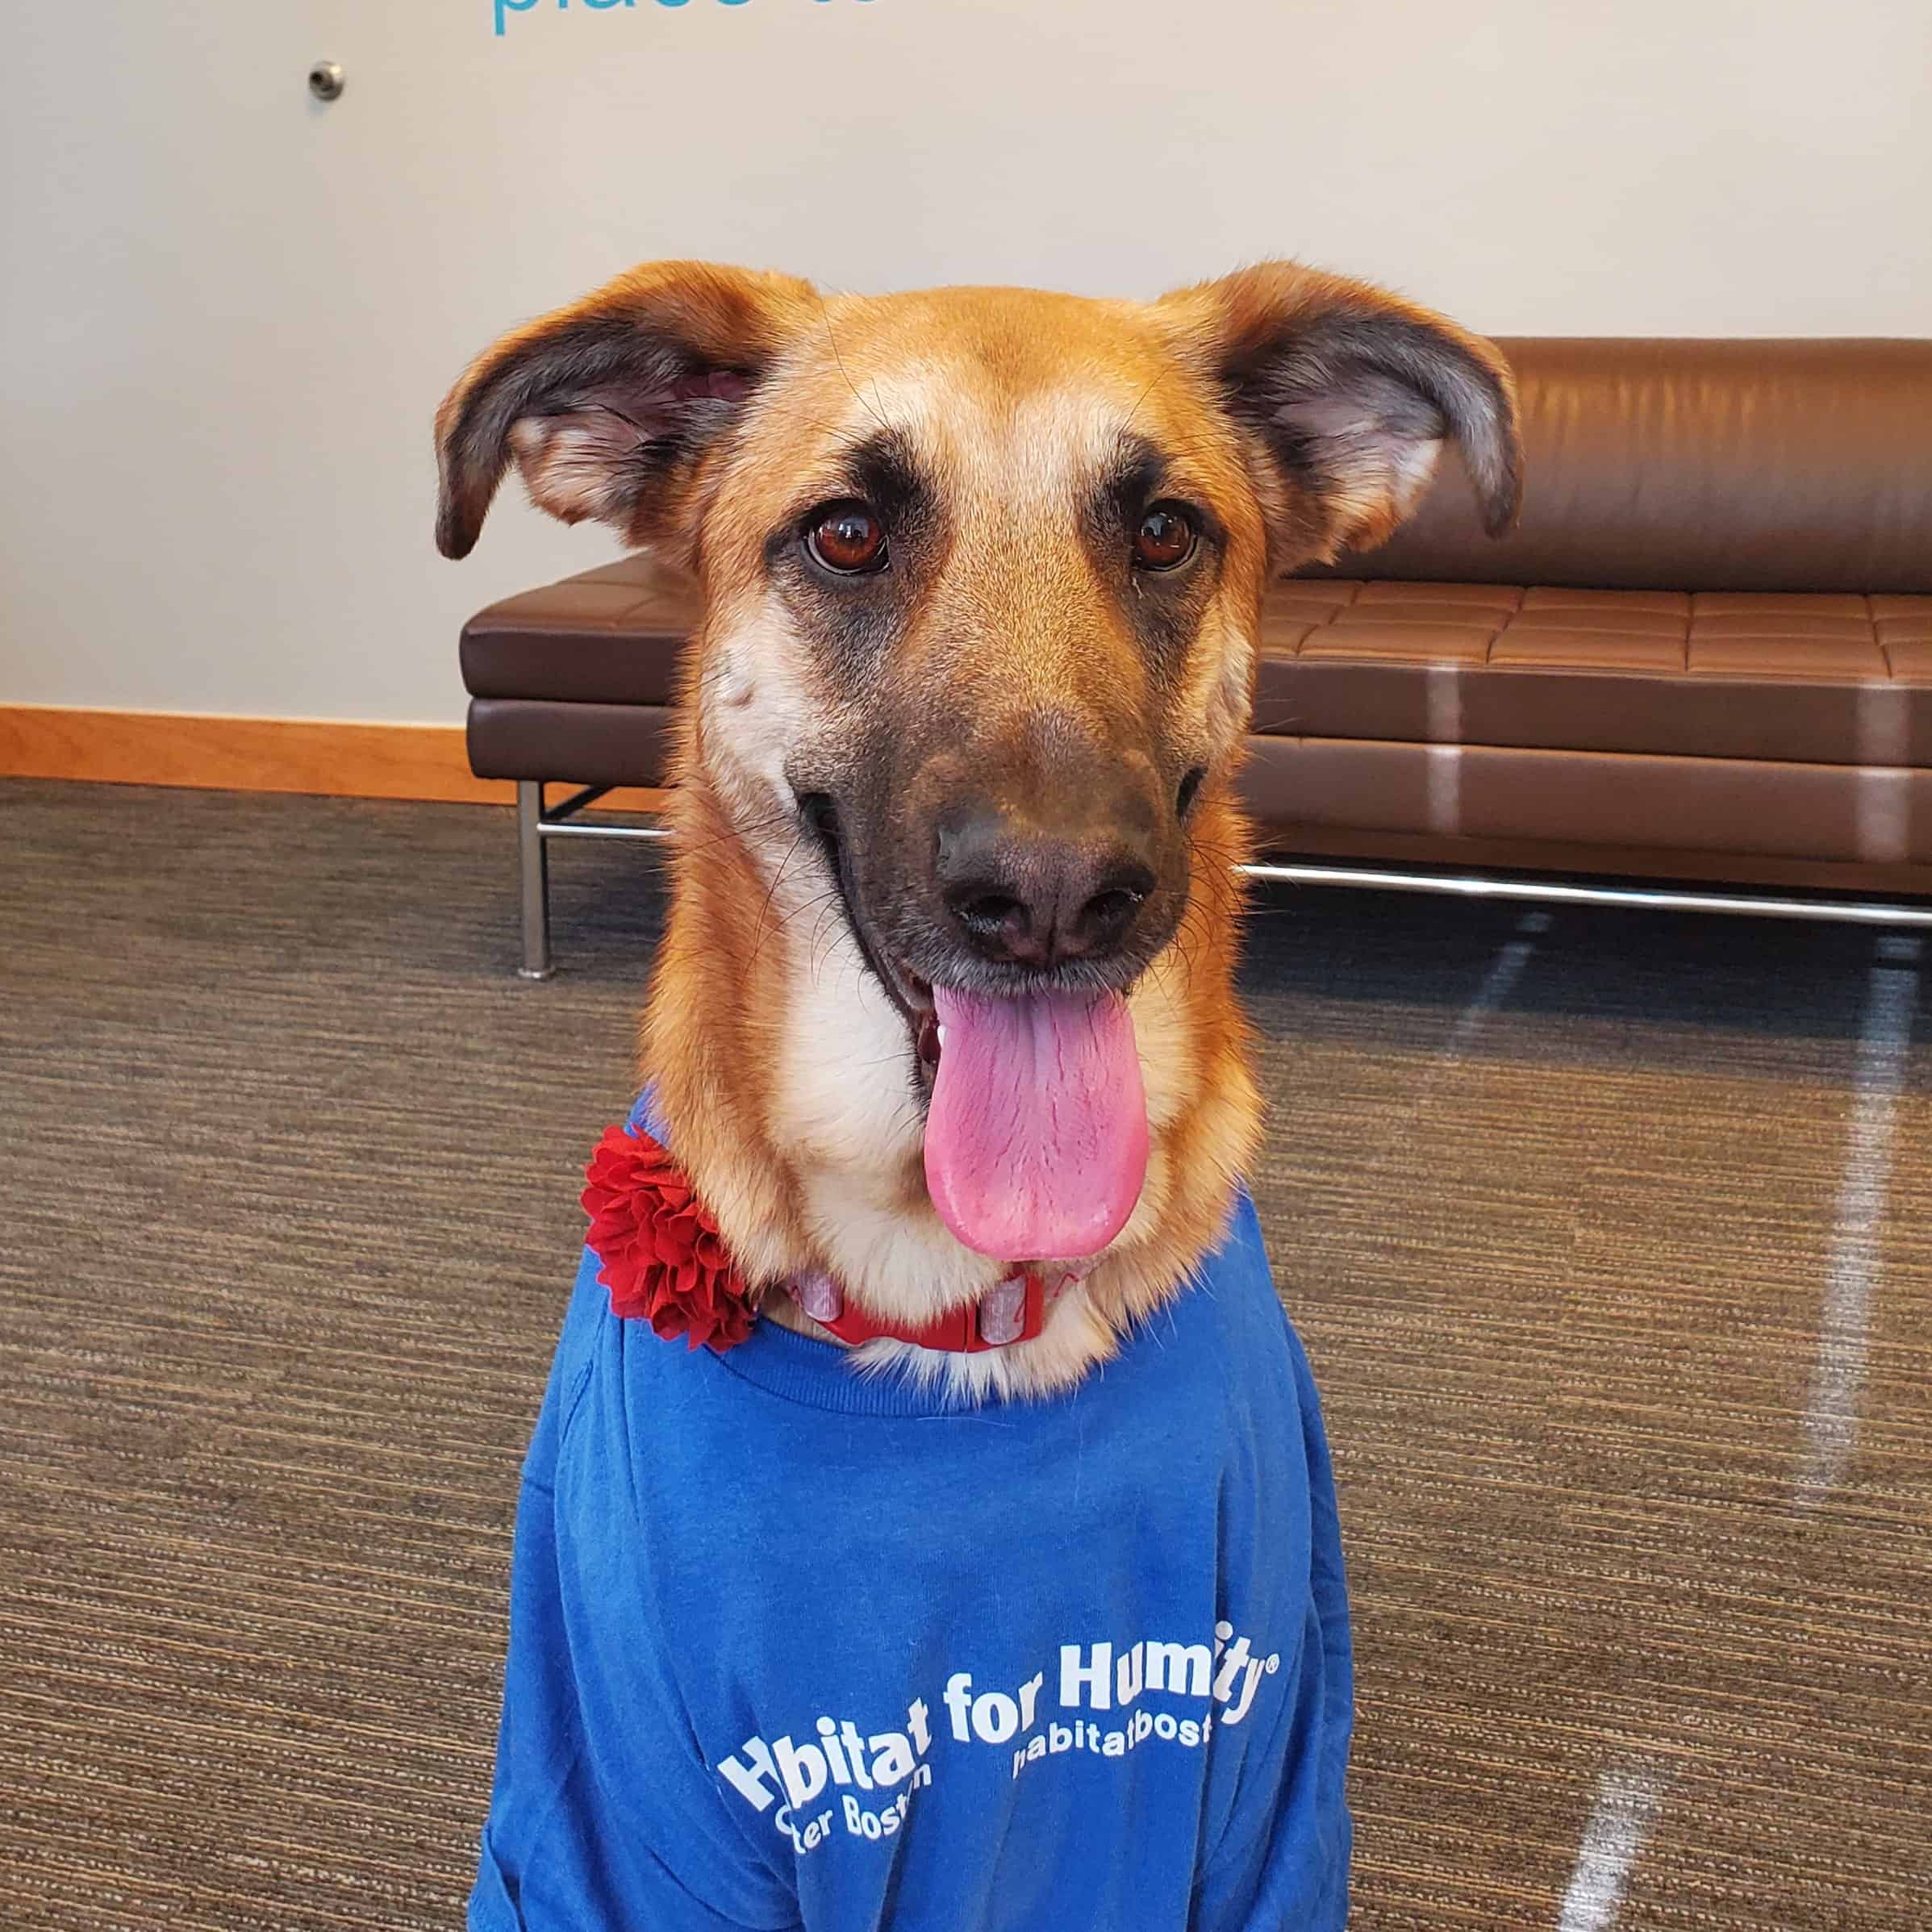 A very cute dog with floppy ears and a blue Habitat for Humanity Greater Boston T-shirt